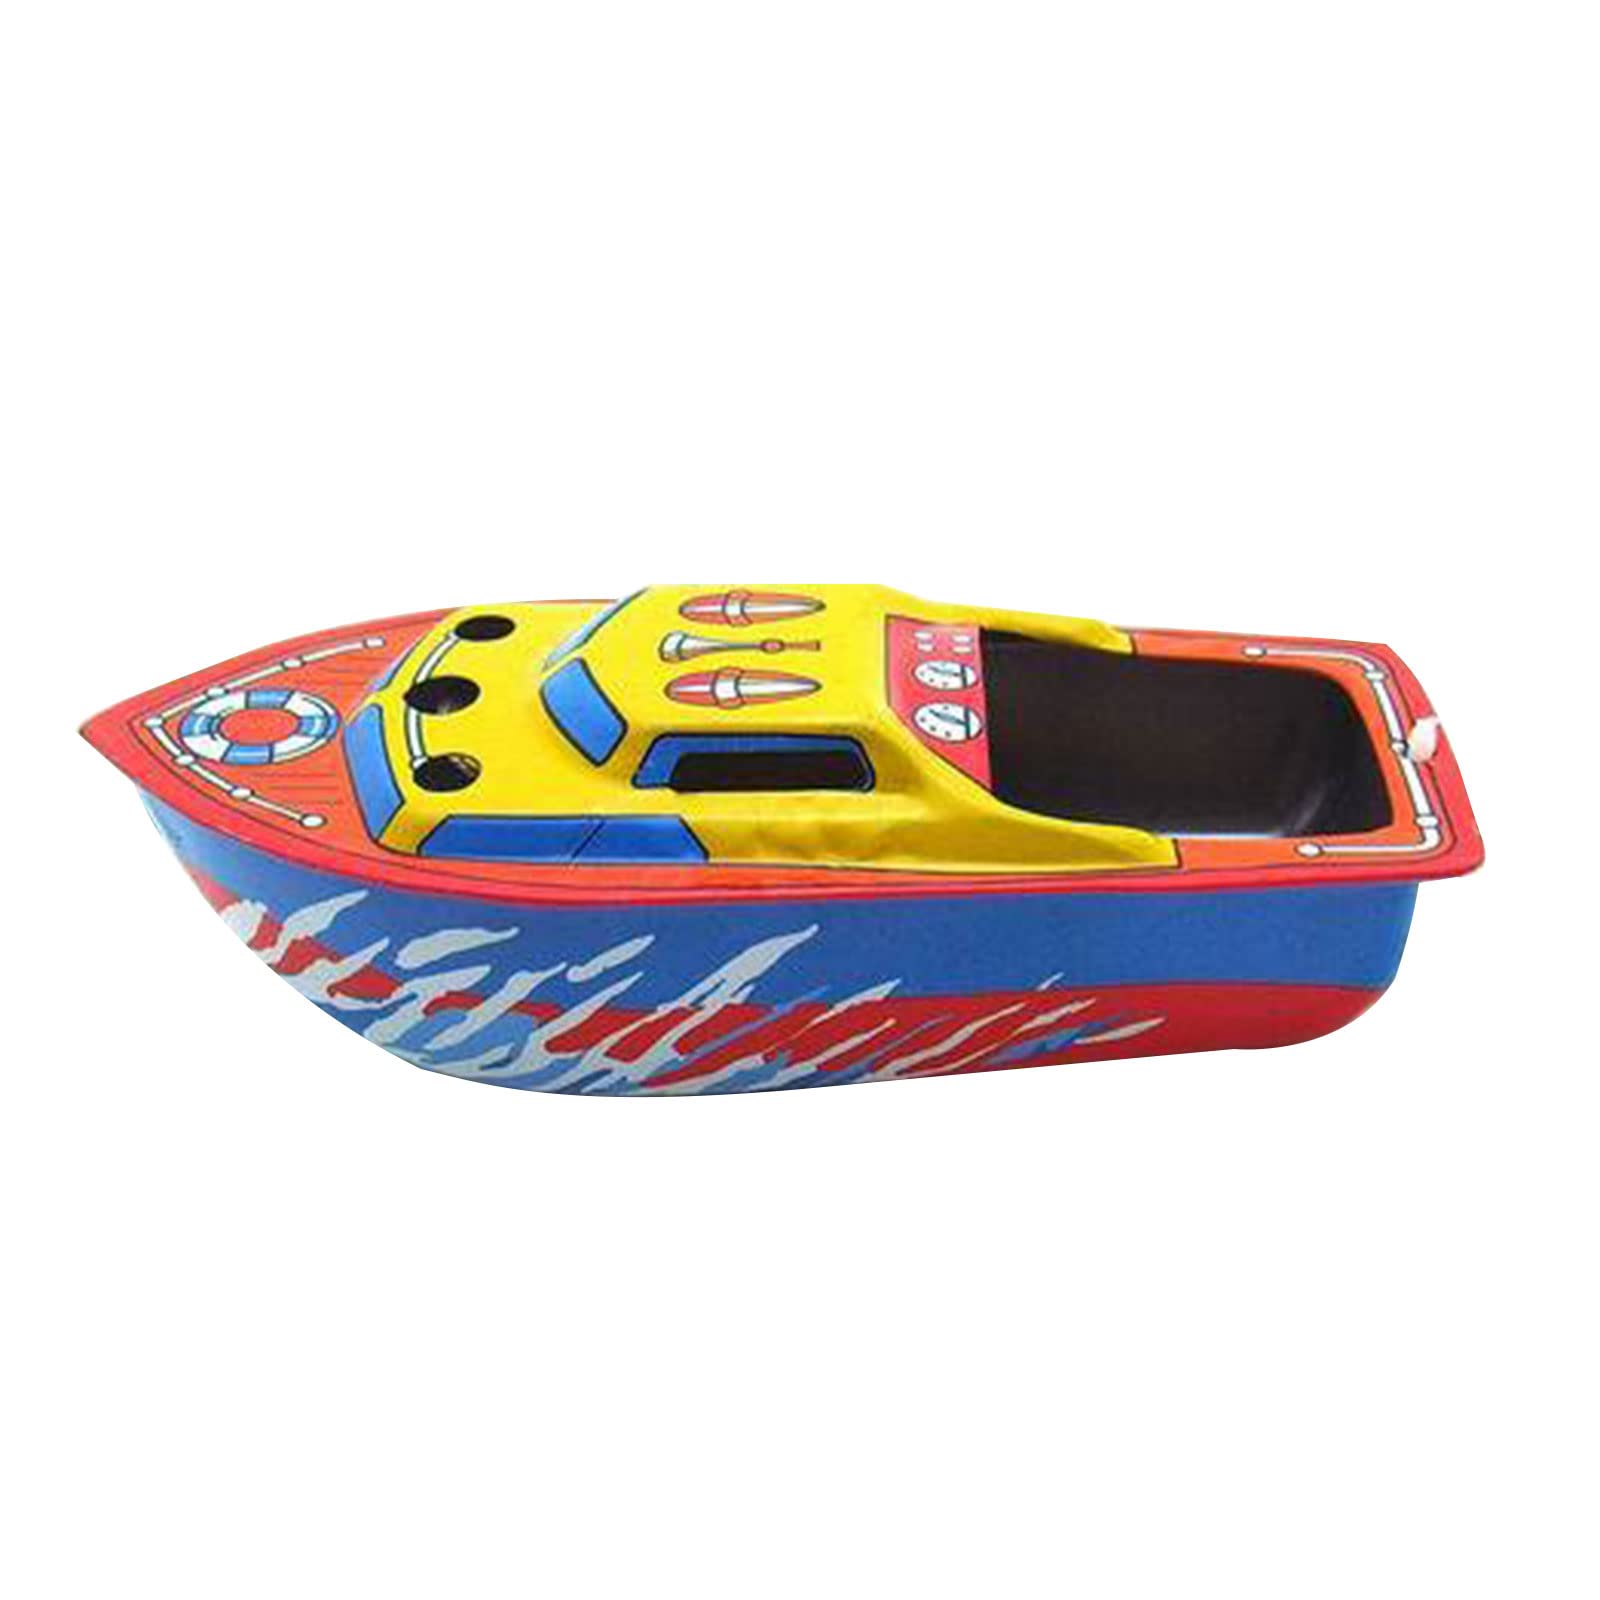 ljhnba Boat Candle Collectable Tin Toy Powered Ship Tin Vehicle Toy for Physics Gadget Student Learning Science Gadget